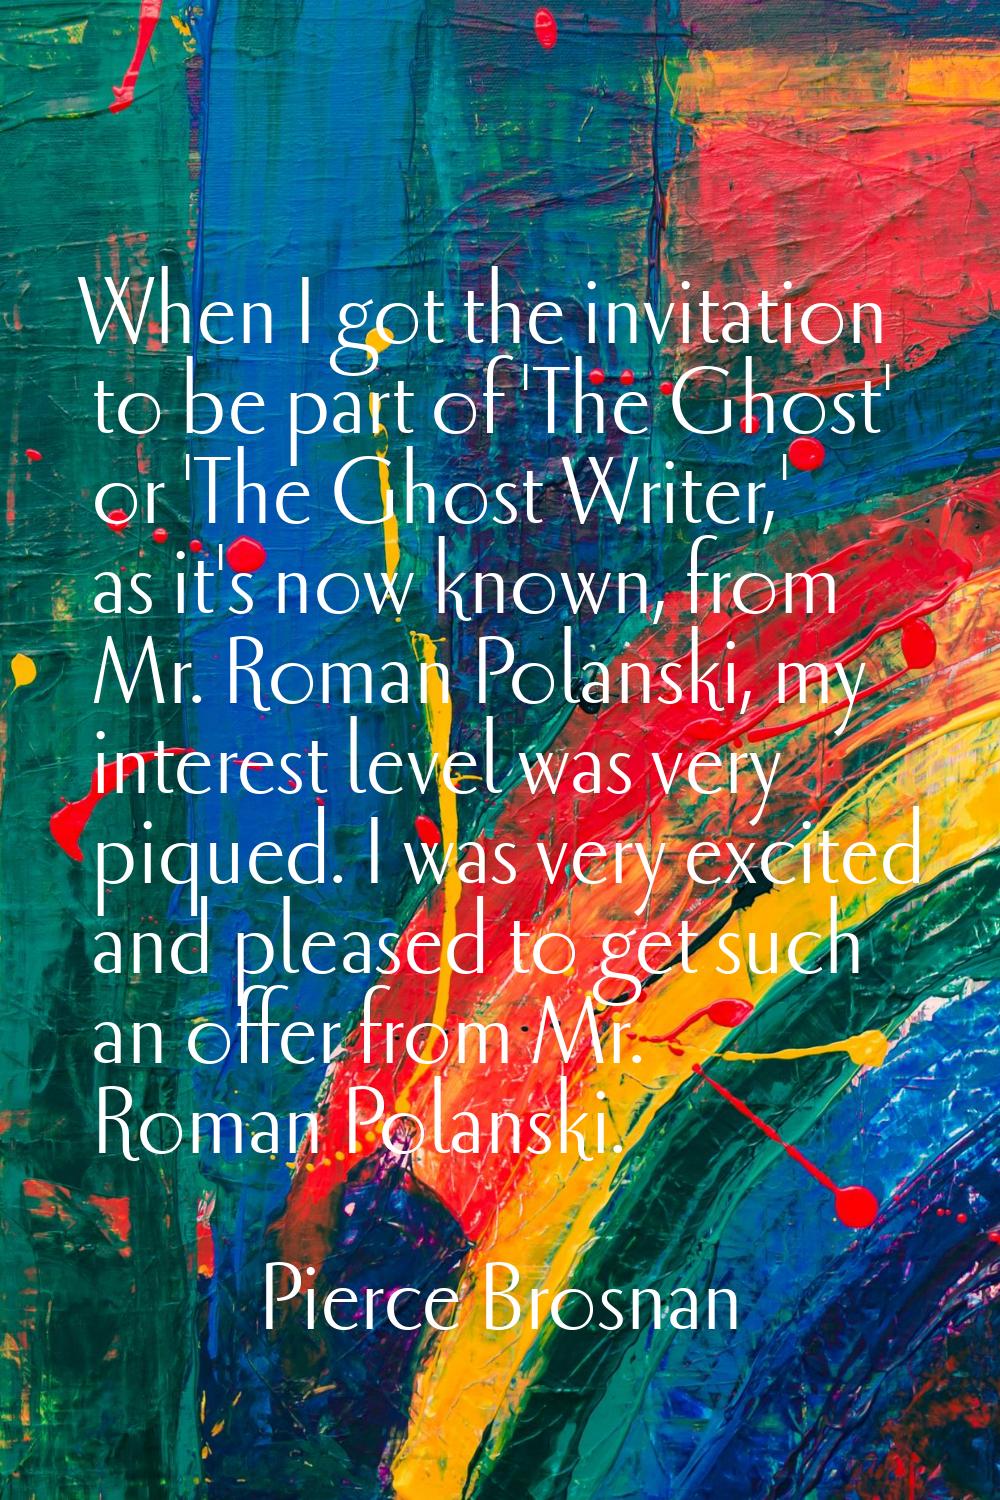 When I got the invitation to be part of 'The Ghost' or 'The Ghost Writer,' as it's now known, from 